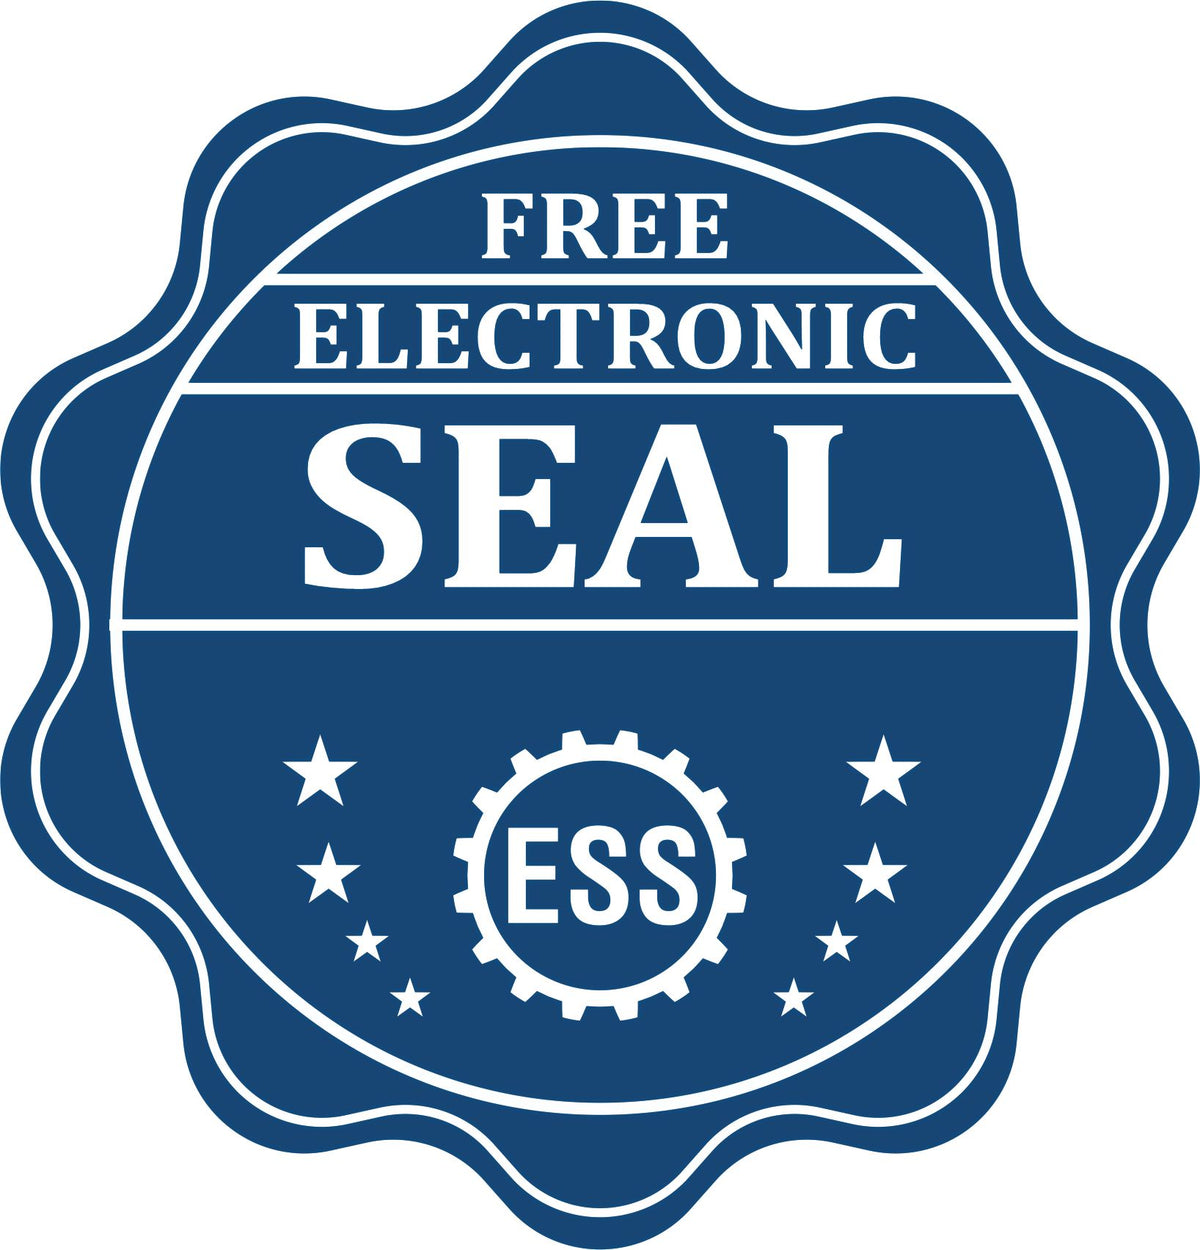 A badge showing a free electronic seal for the Gift Utah Architect Seal with stars and the ESS gear on the emblem.